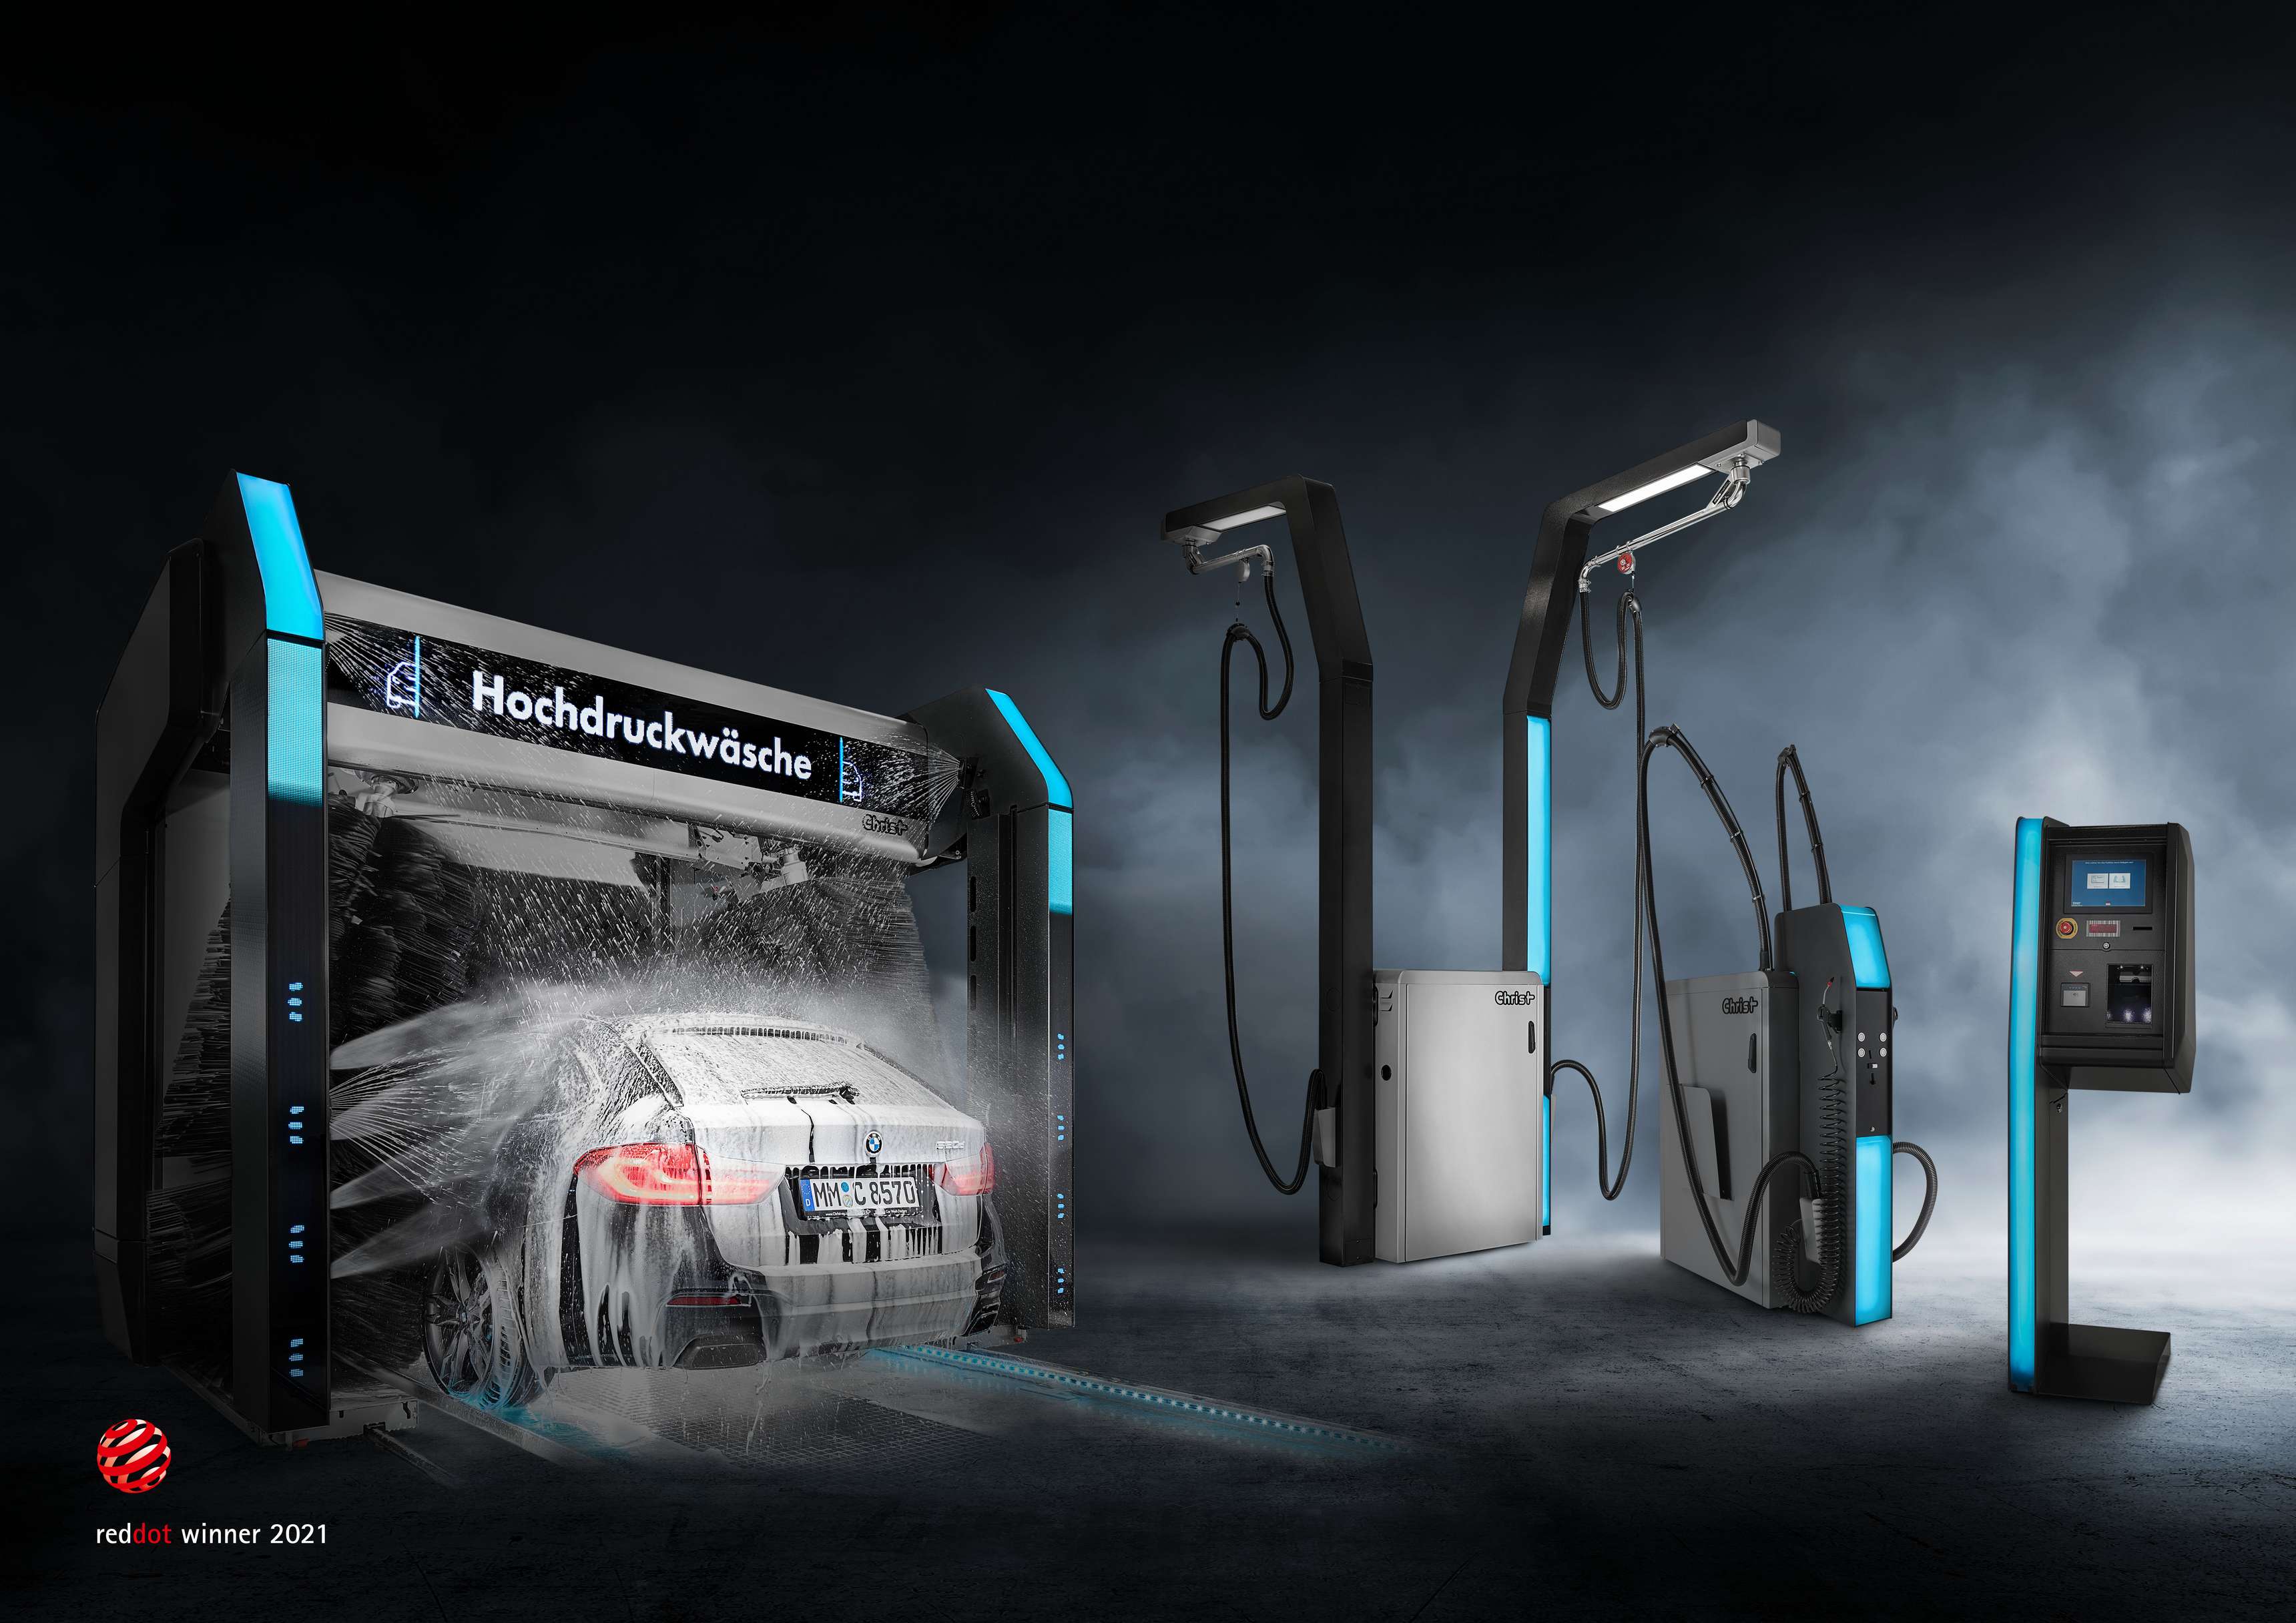 THE FUTURE OF CARWASH